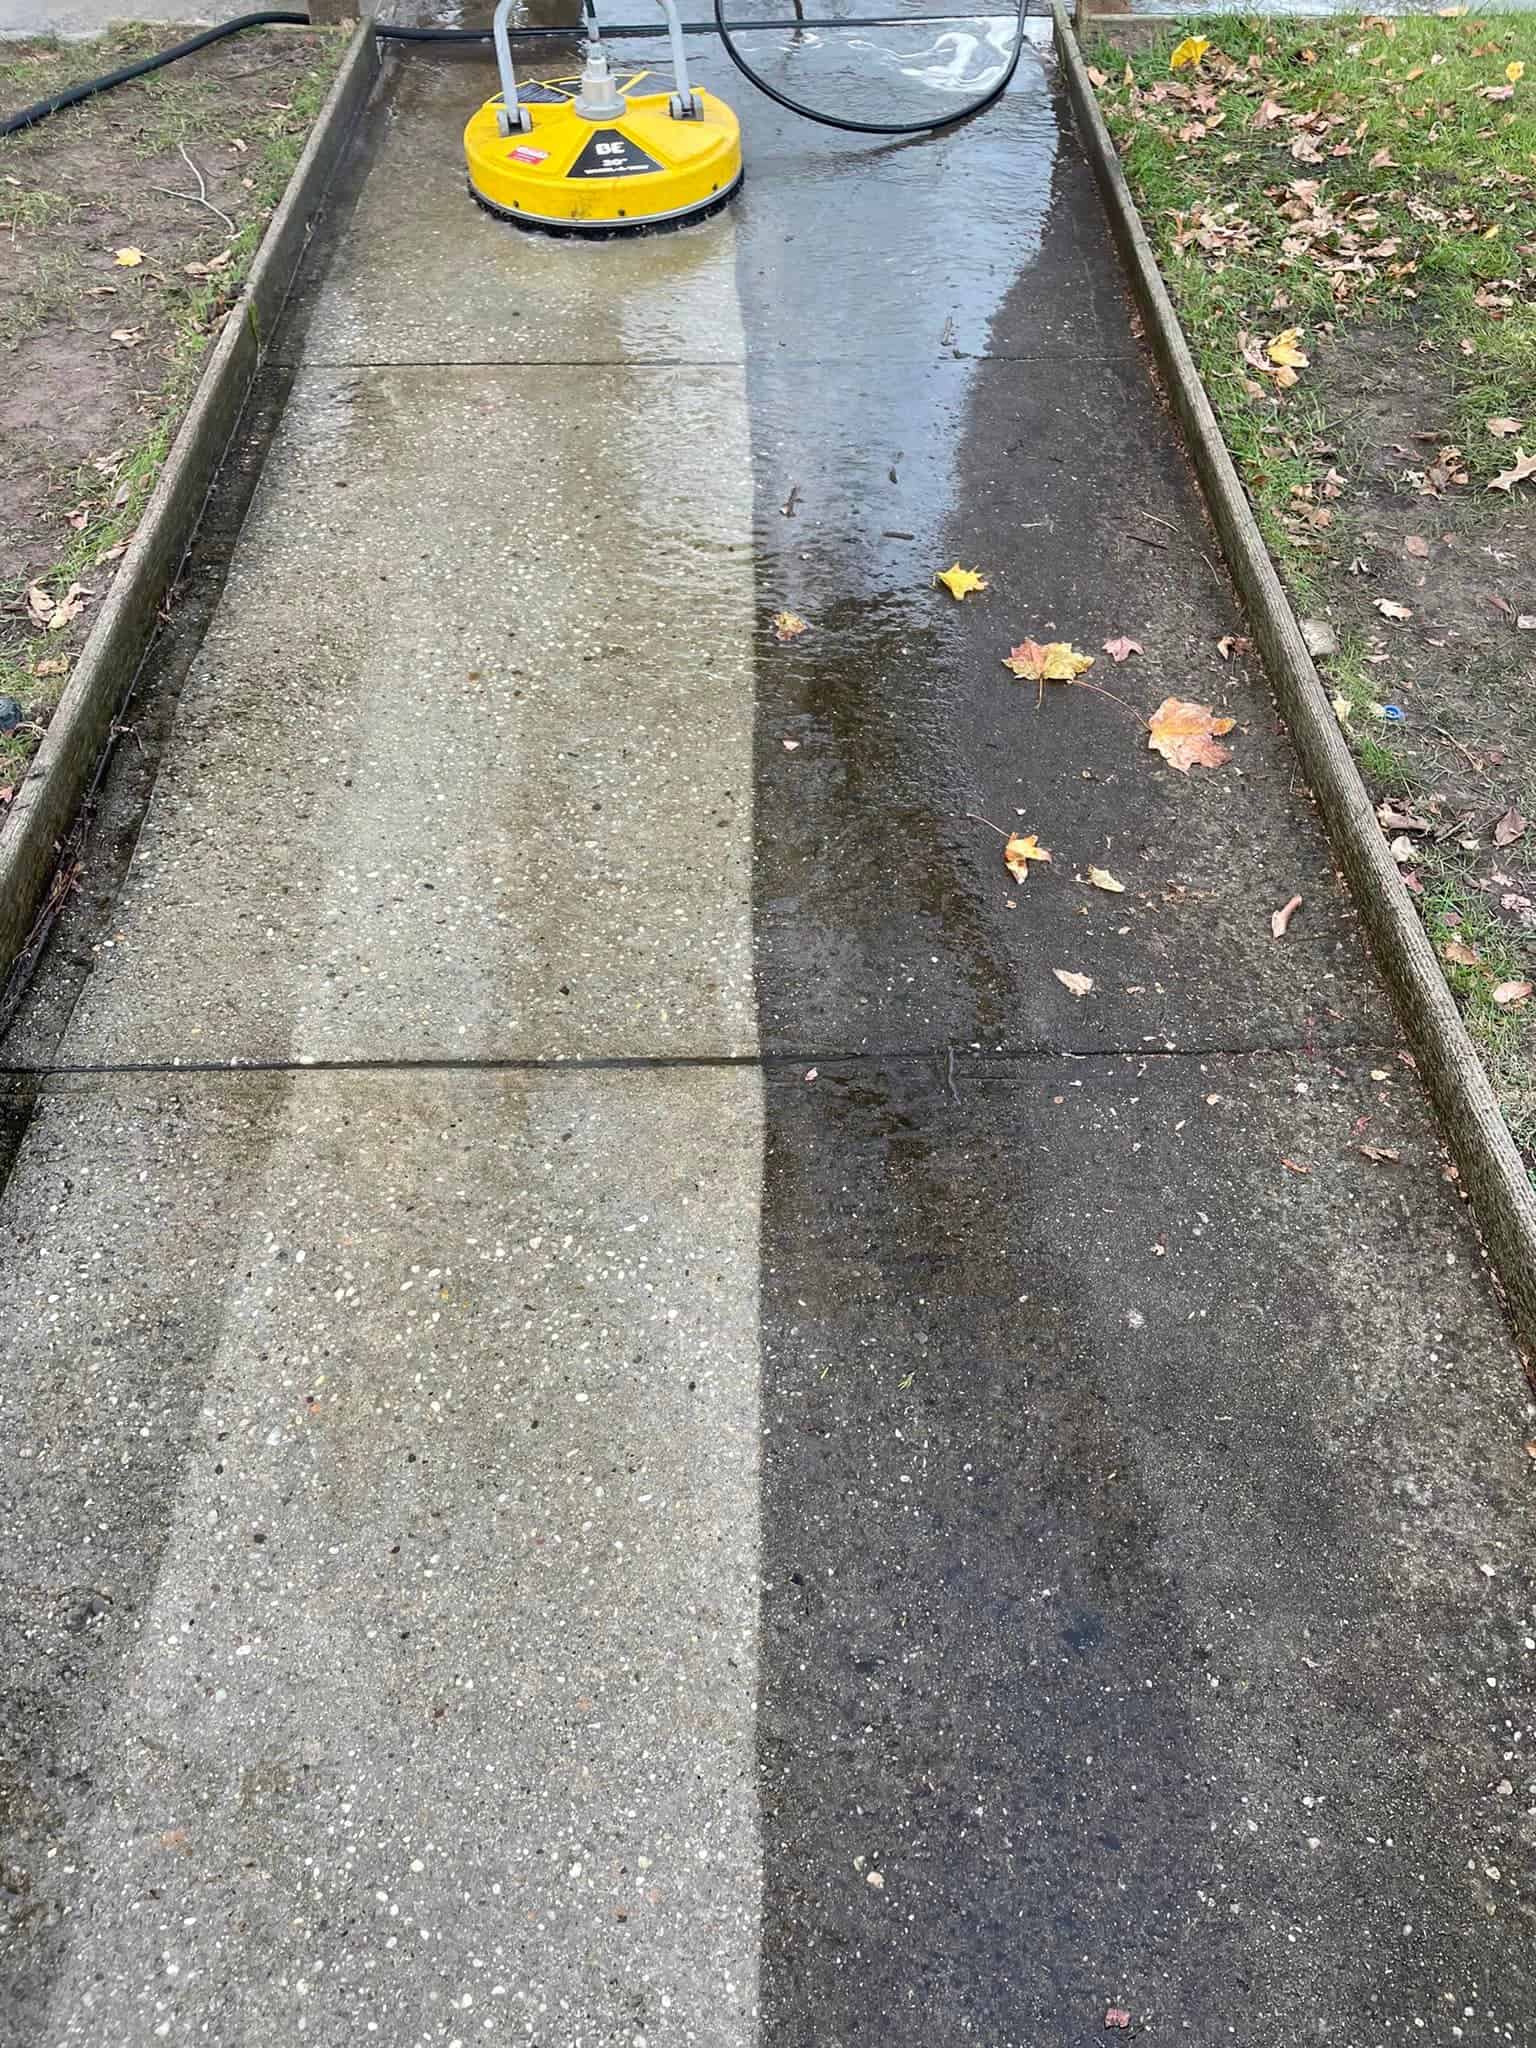 Power Washing Services Near Me in Brightwaters, NY